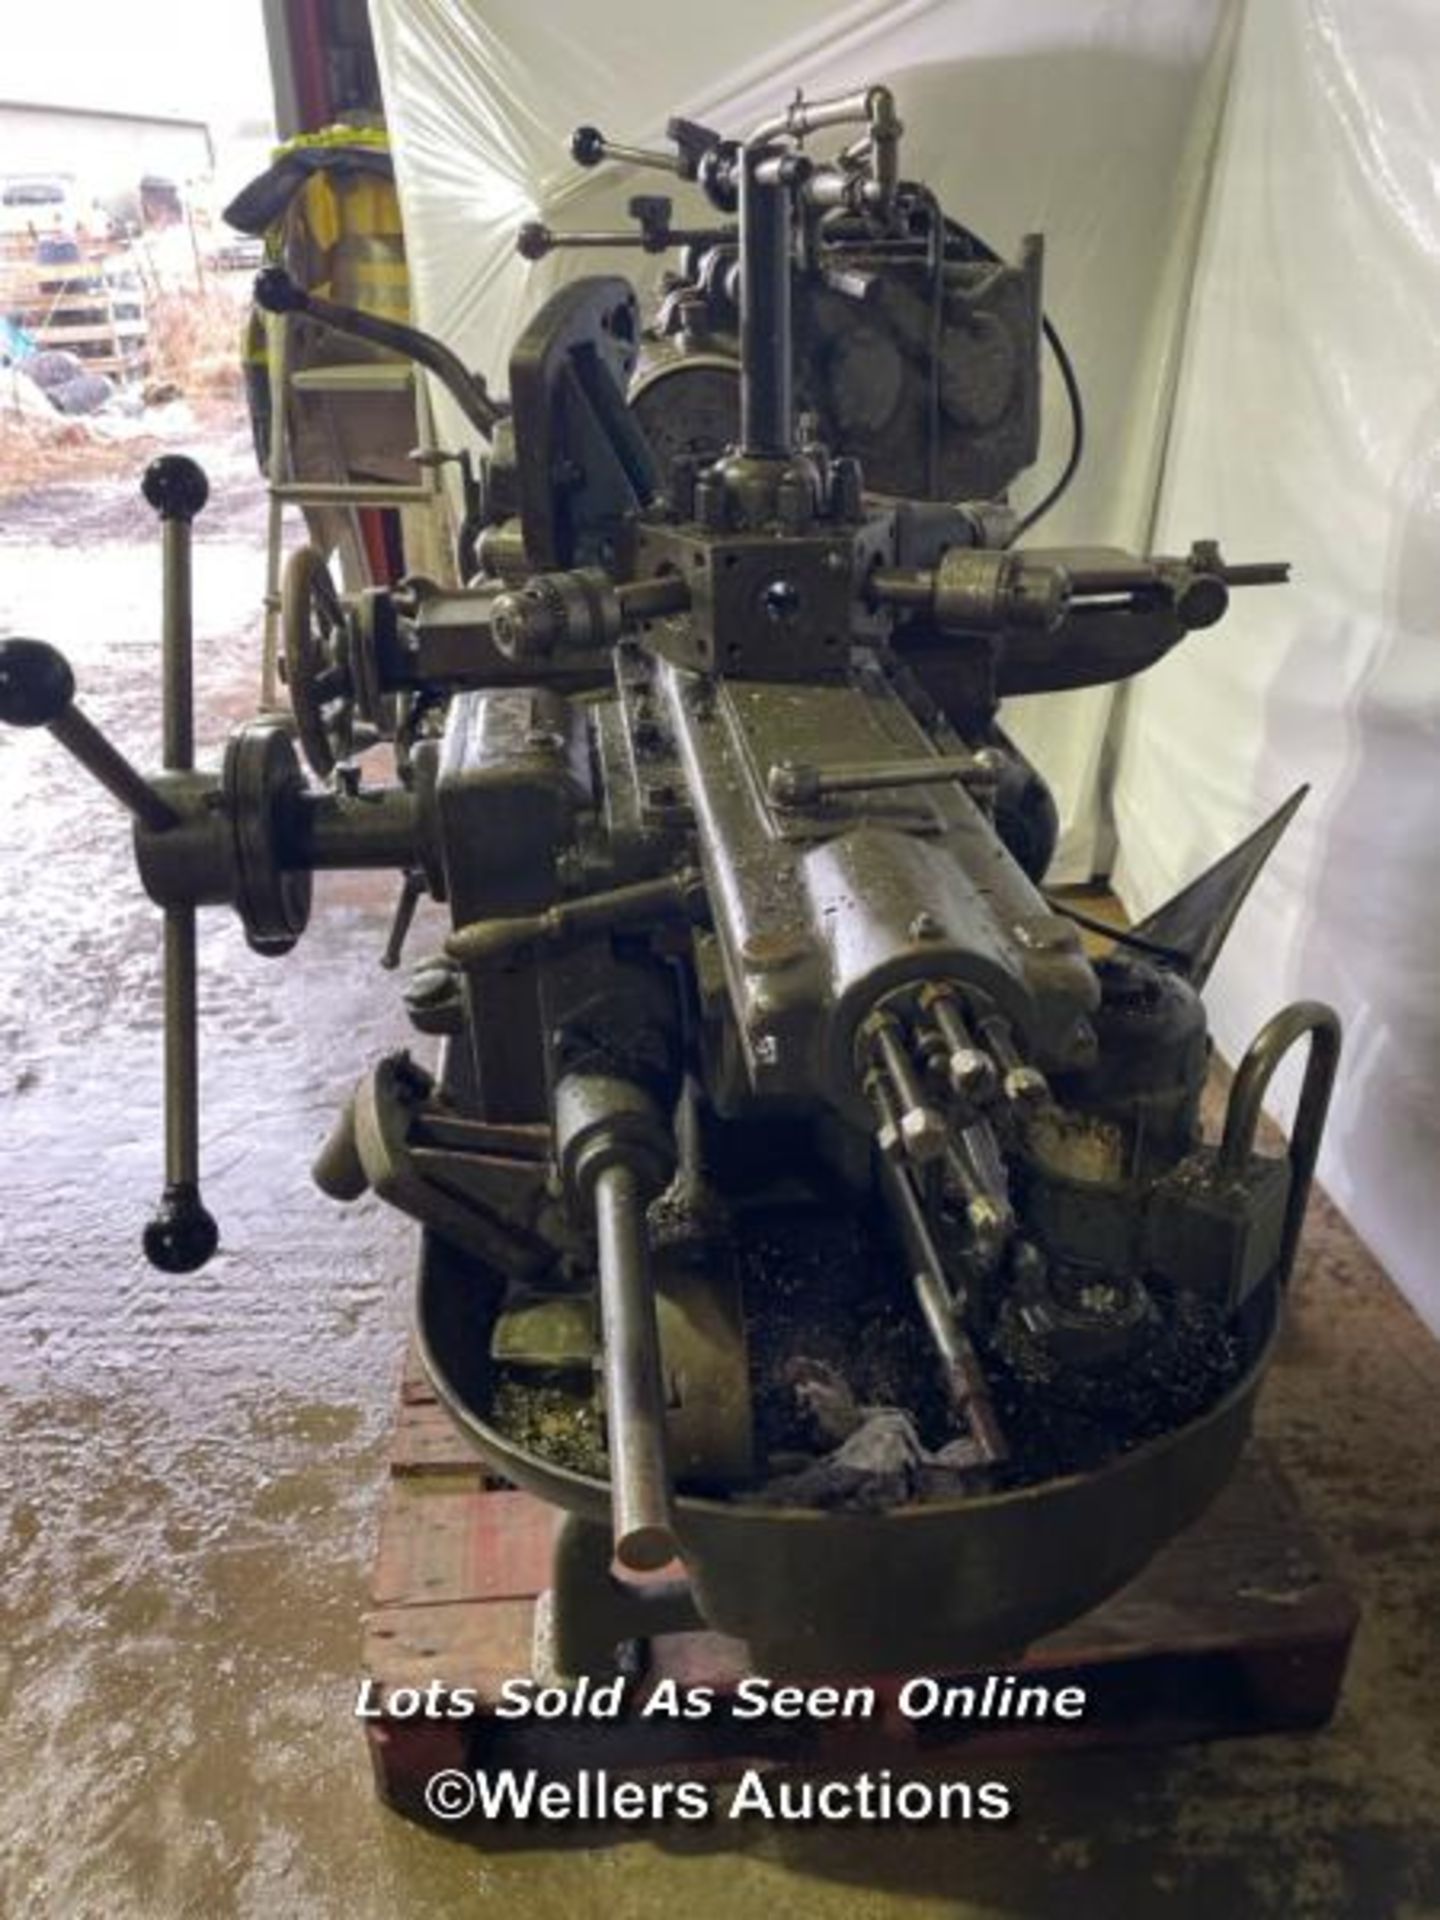 H. W. WARD AND SON CAPSTAN 2A LATHE, 3 PHASE, INCL. 3 JAW CHUCK, IN WORKING ORDER - Image 7 of 9